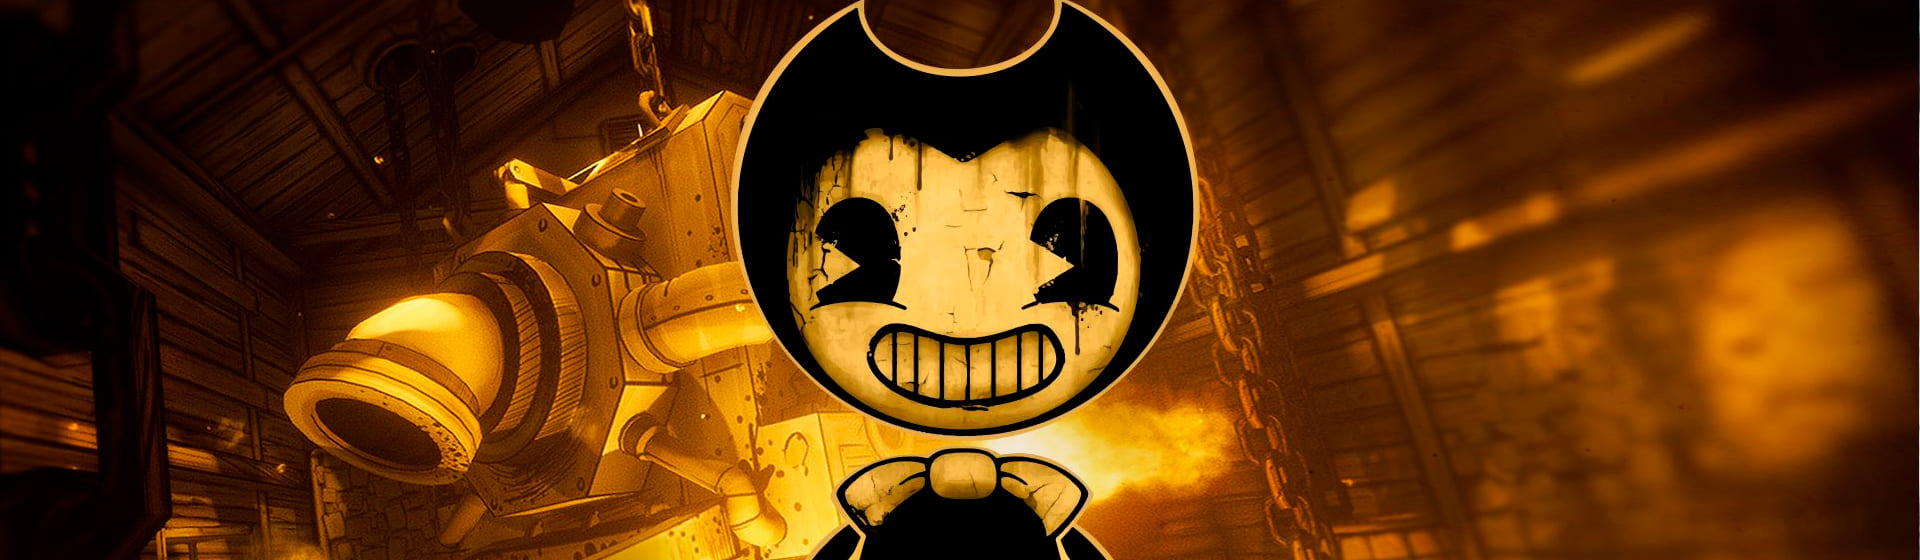 Bendy And the ink machine